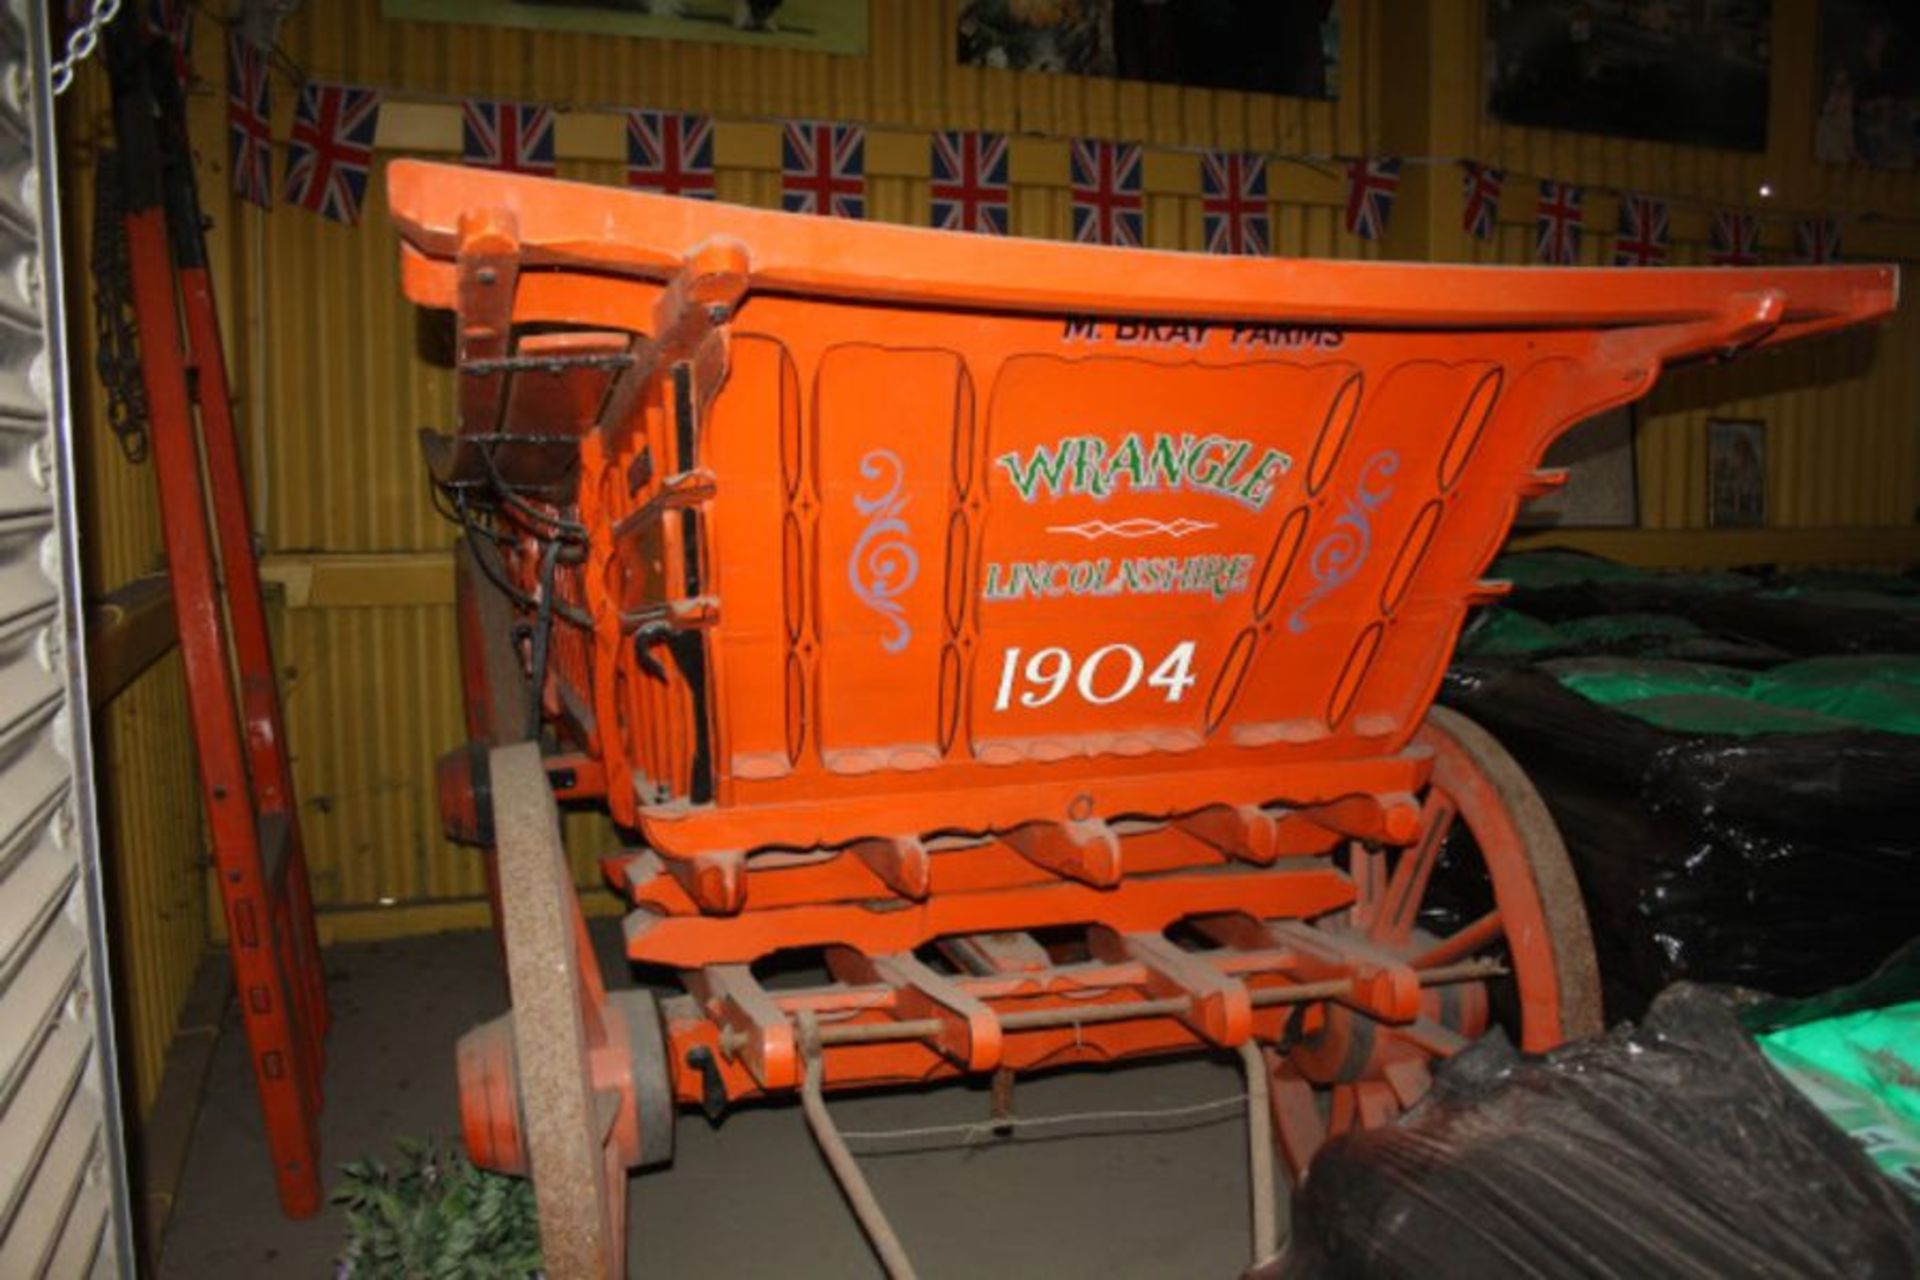 1904 M Bray Farms, Wrangle 4 wheel horse drawn wagon with shafts - Image 2 of 4